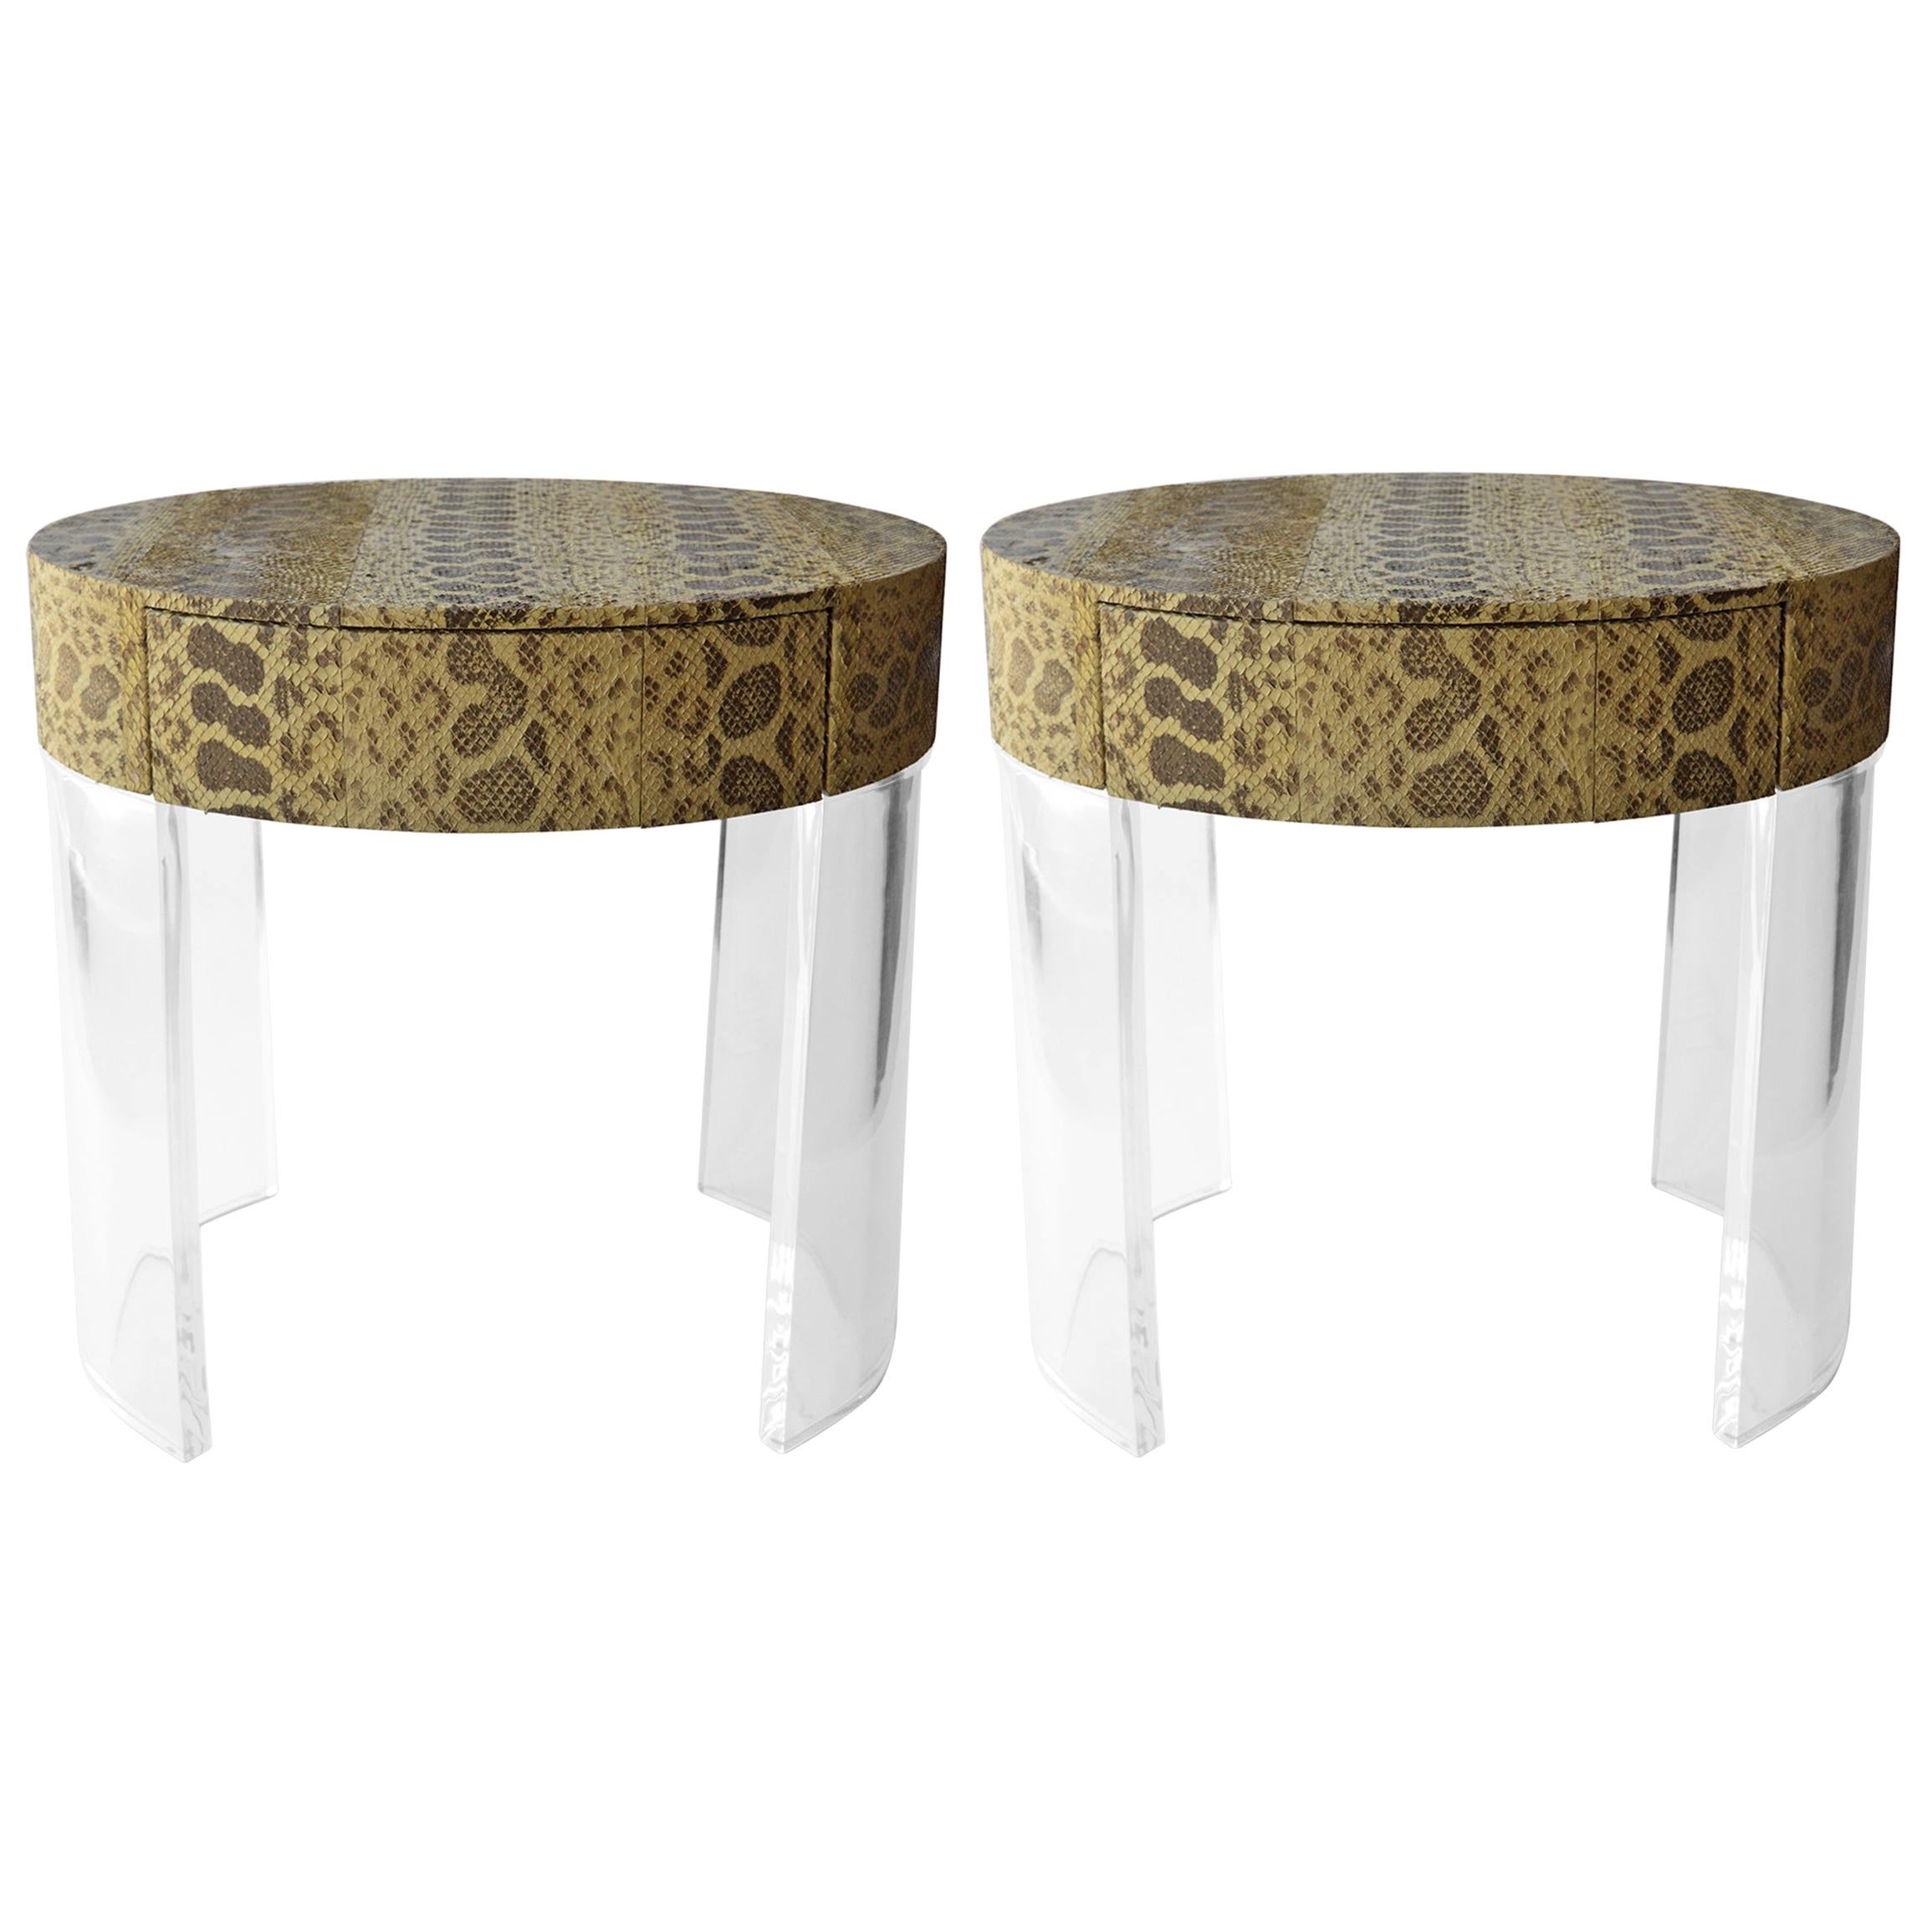 Pair of Python Covered Side Tables